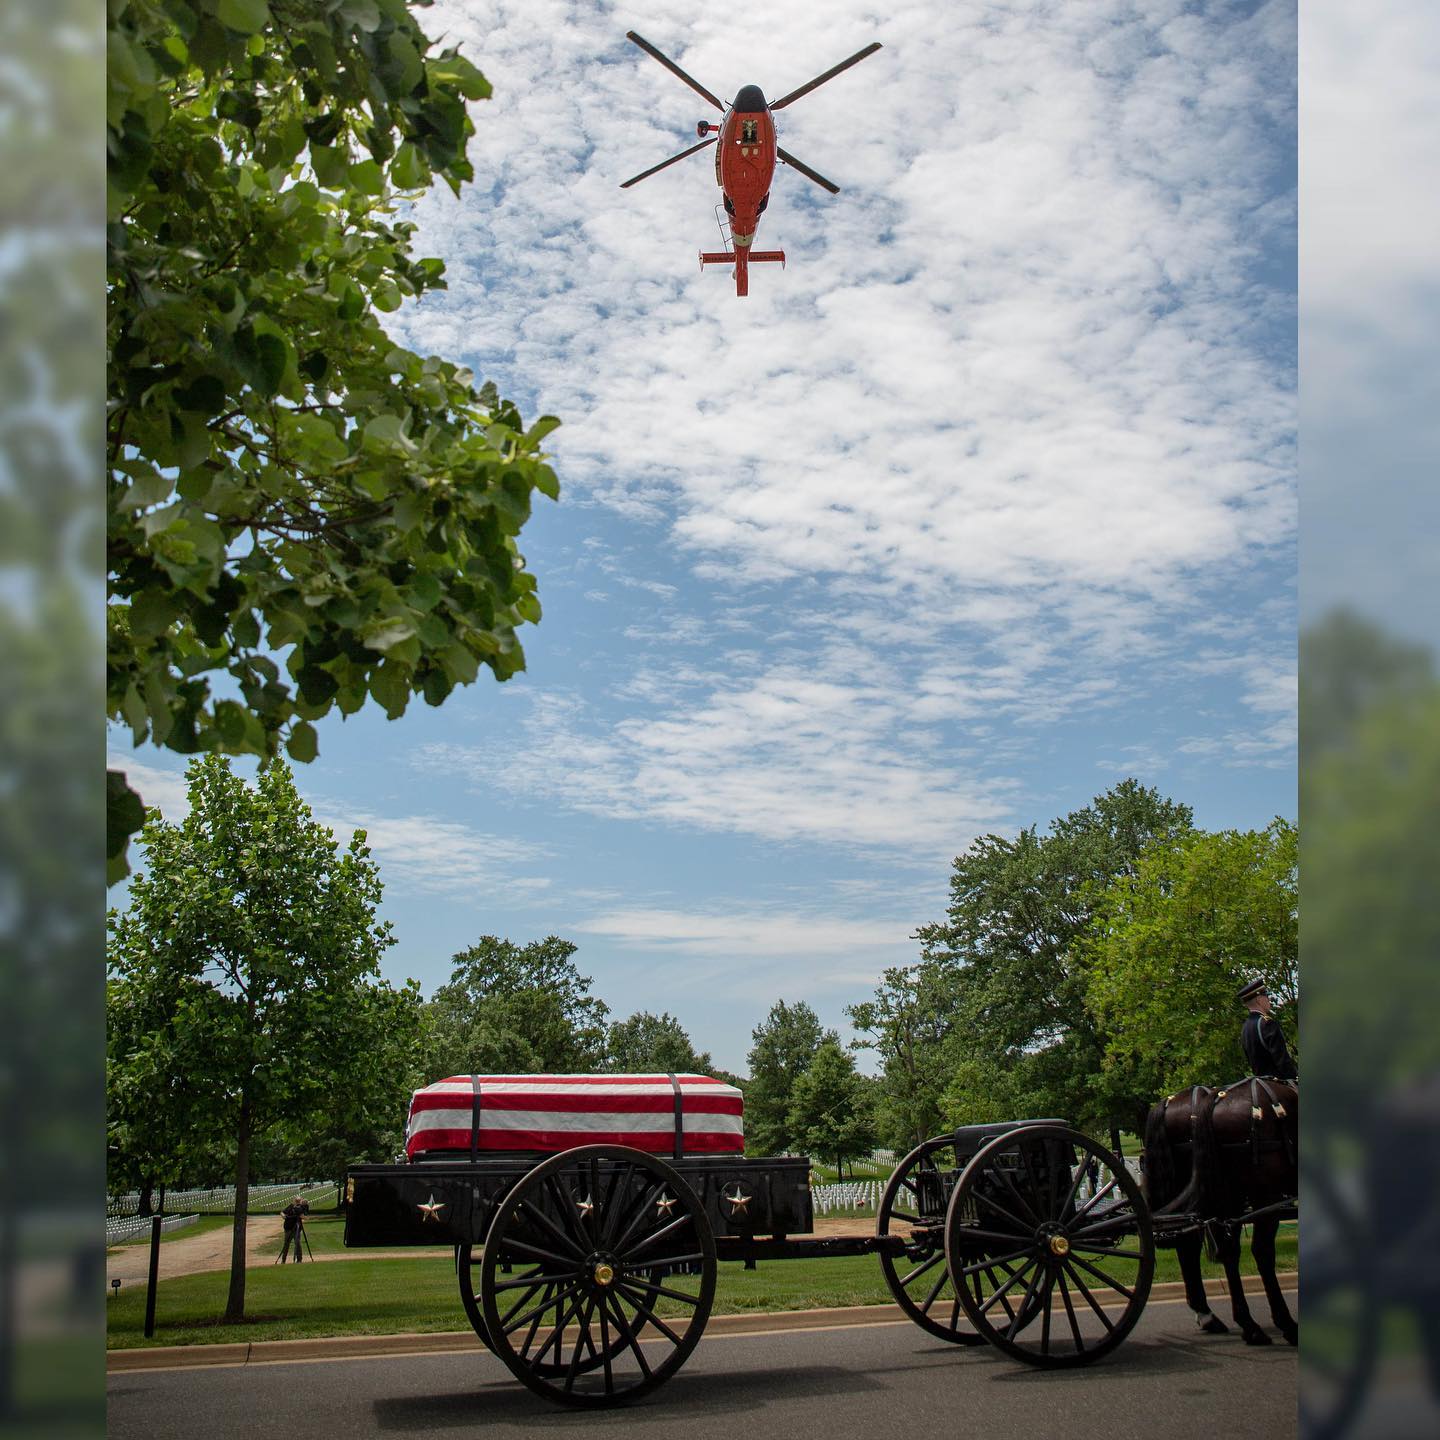 A @uscg service at @arlingtonnatl with a flyover by Blackjack One, a Coast Guard Eurocopter HH-65C helicopter. (Jon Girard/Arlington Media). #Arlington⠀
#ArlingtonMedia⠀
#ArlingtonCemetery⠀
#ArlingtonNationalCemetery⠀